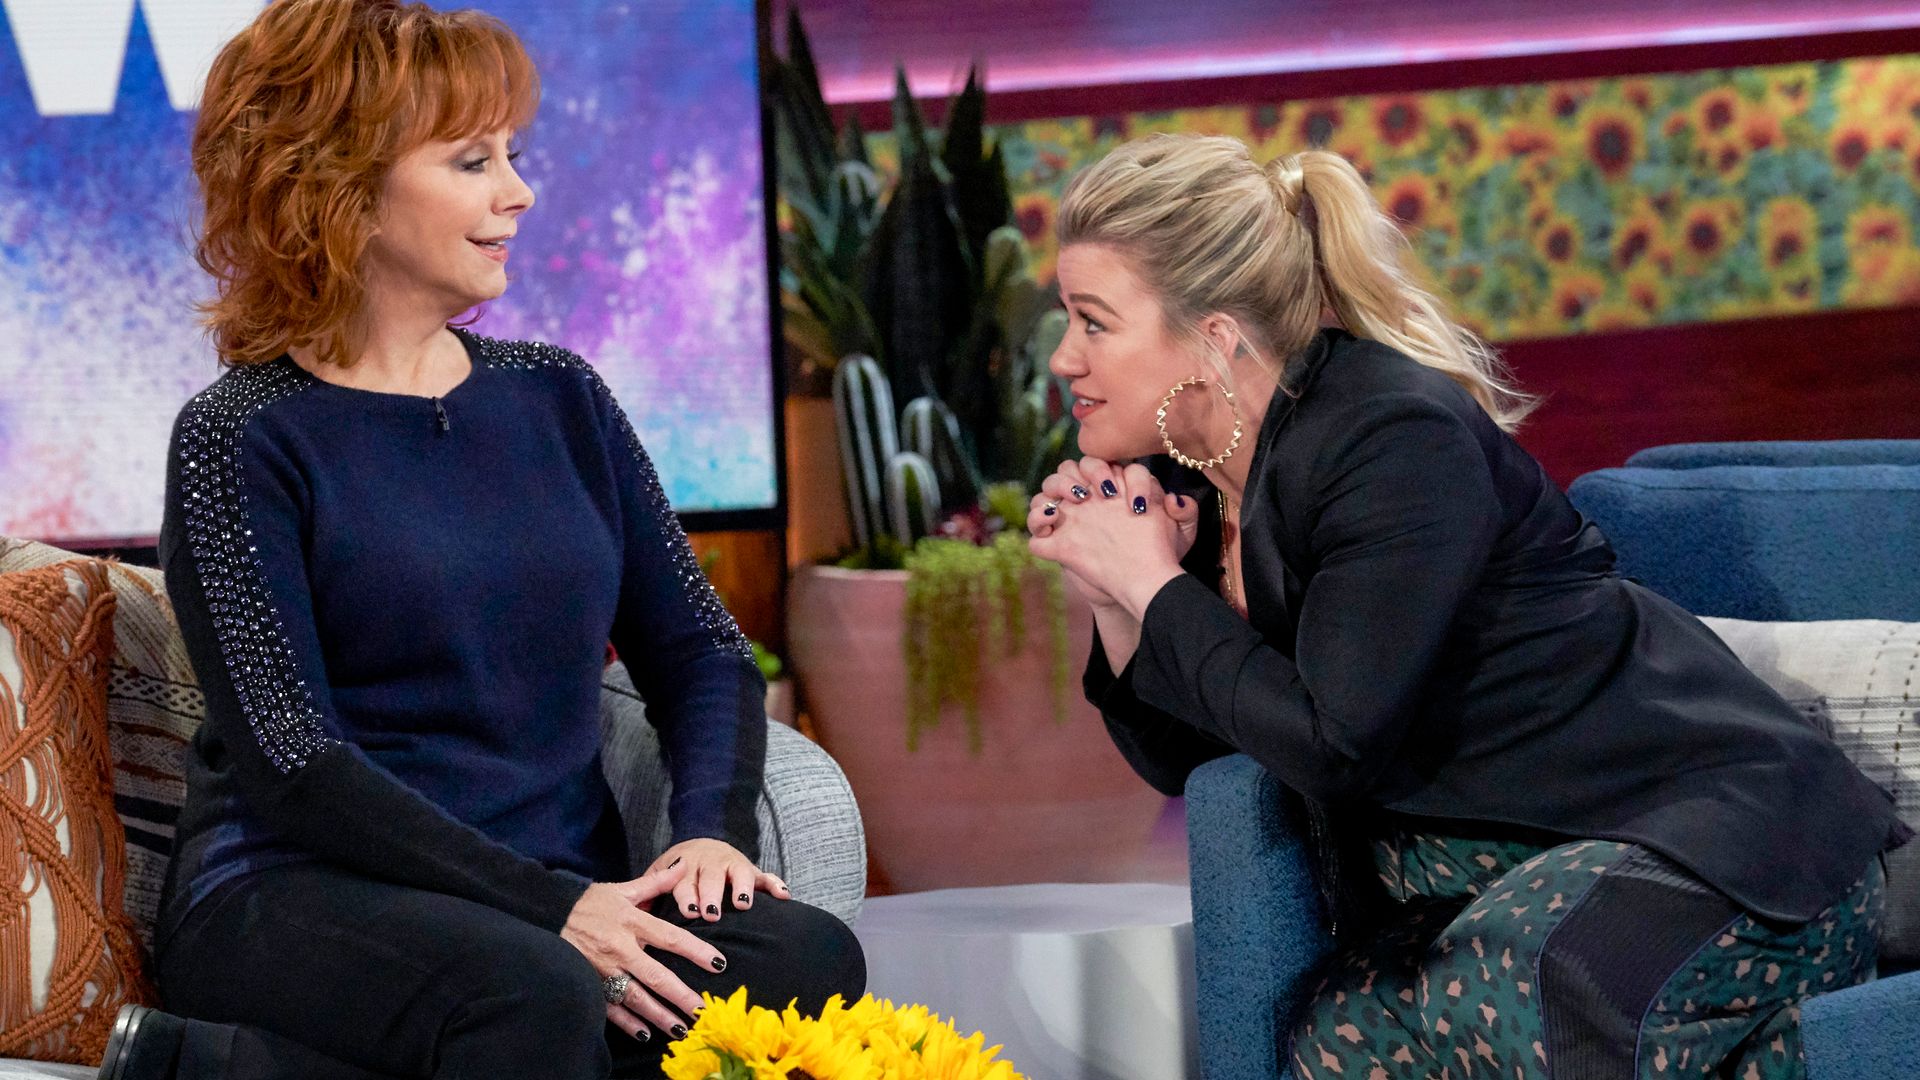 Kelly Clarkson and Reba McEntire chatting